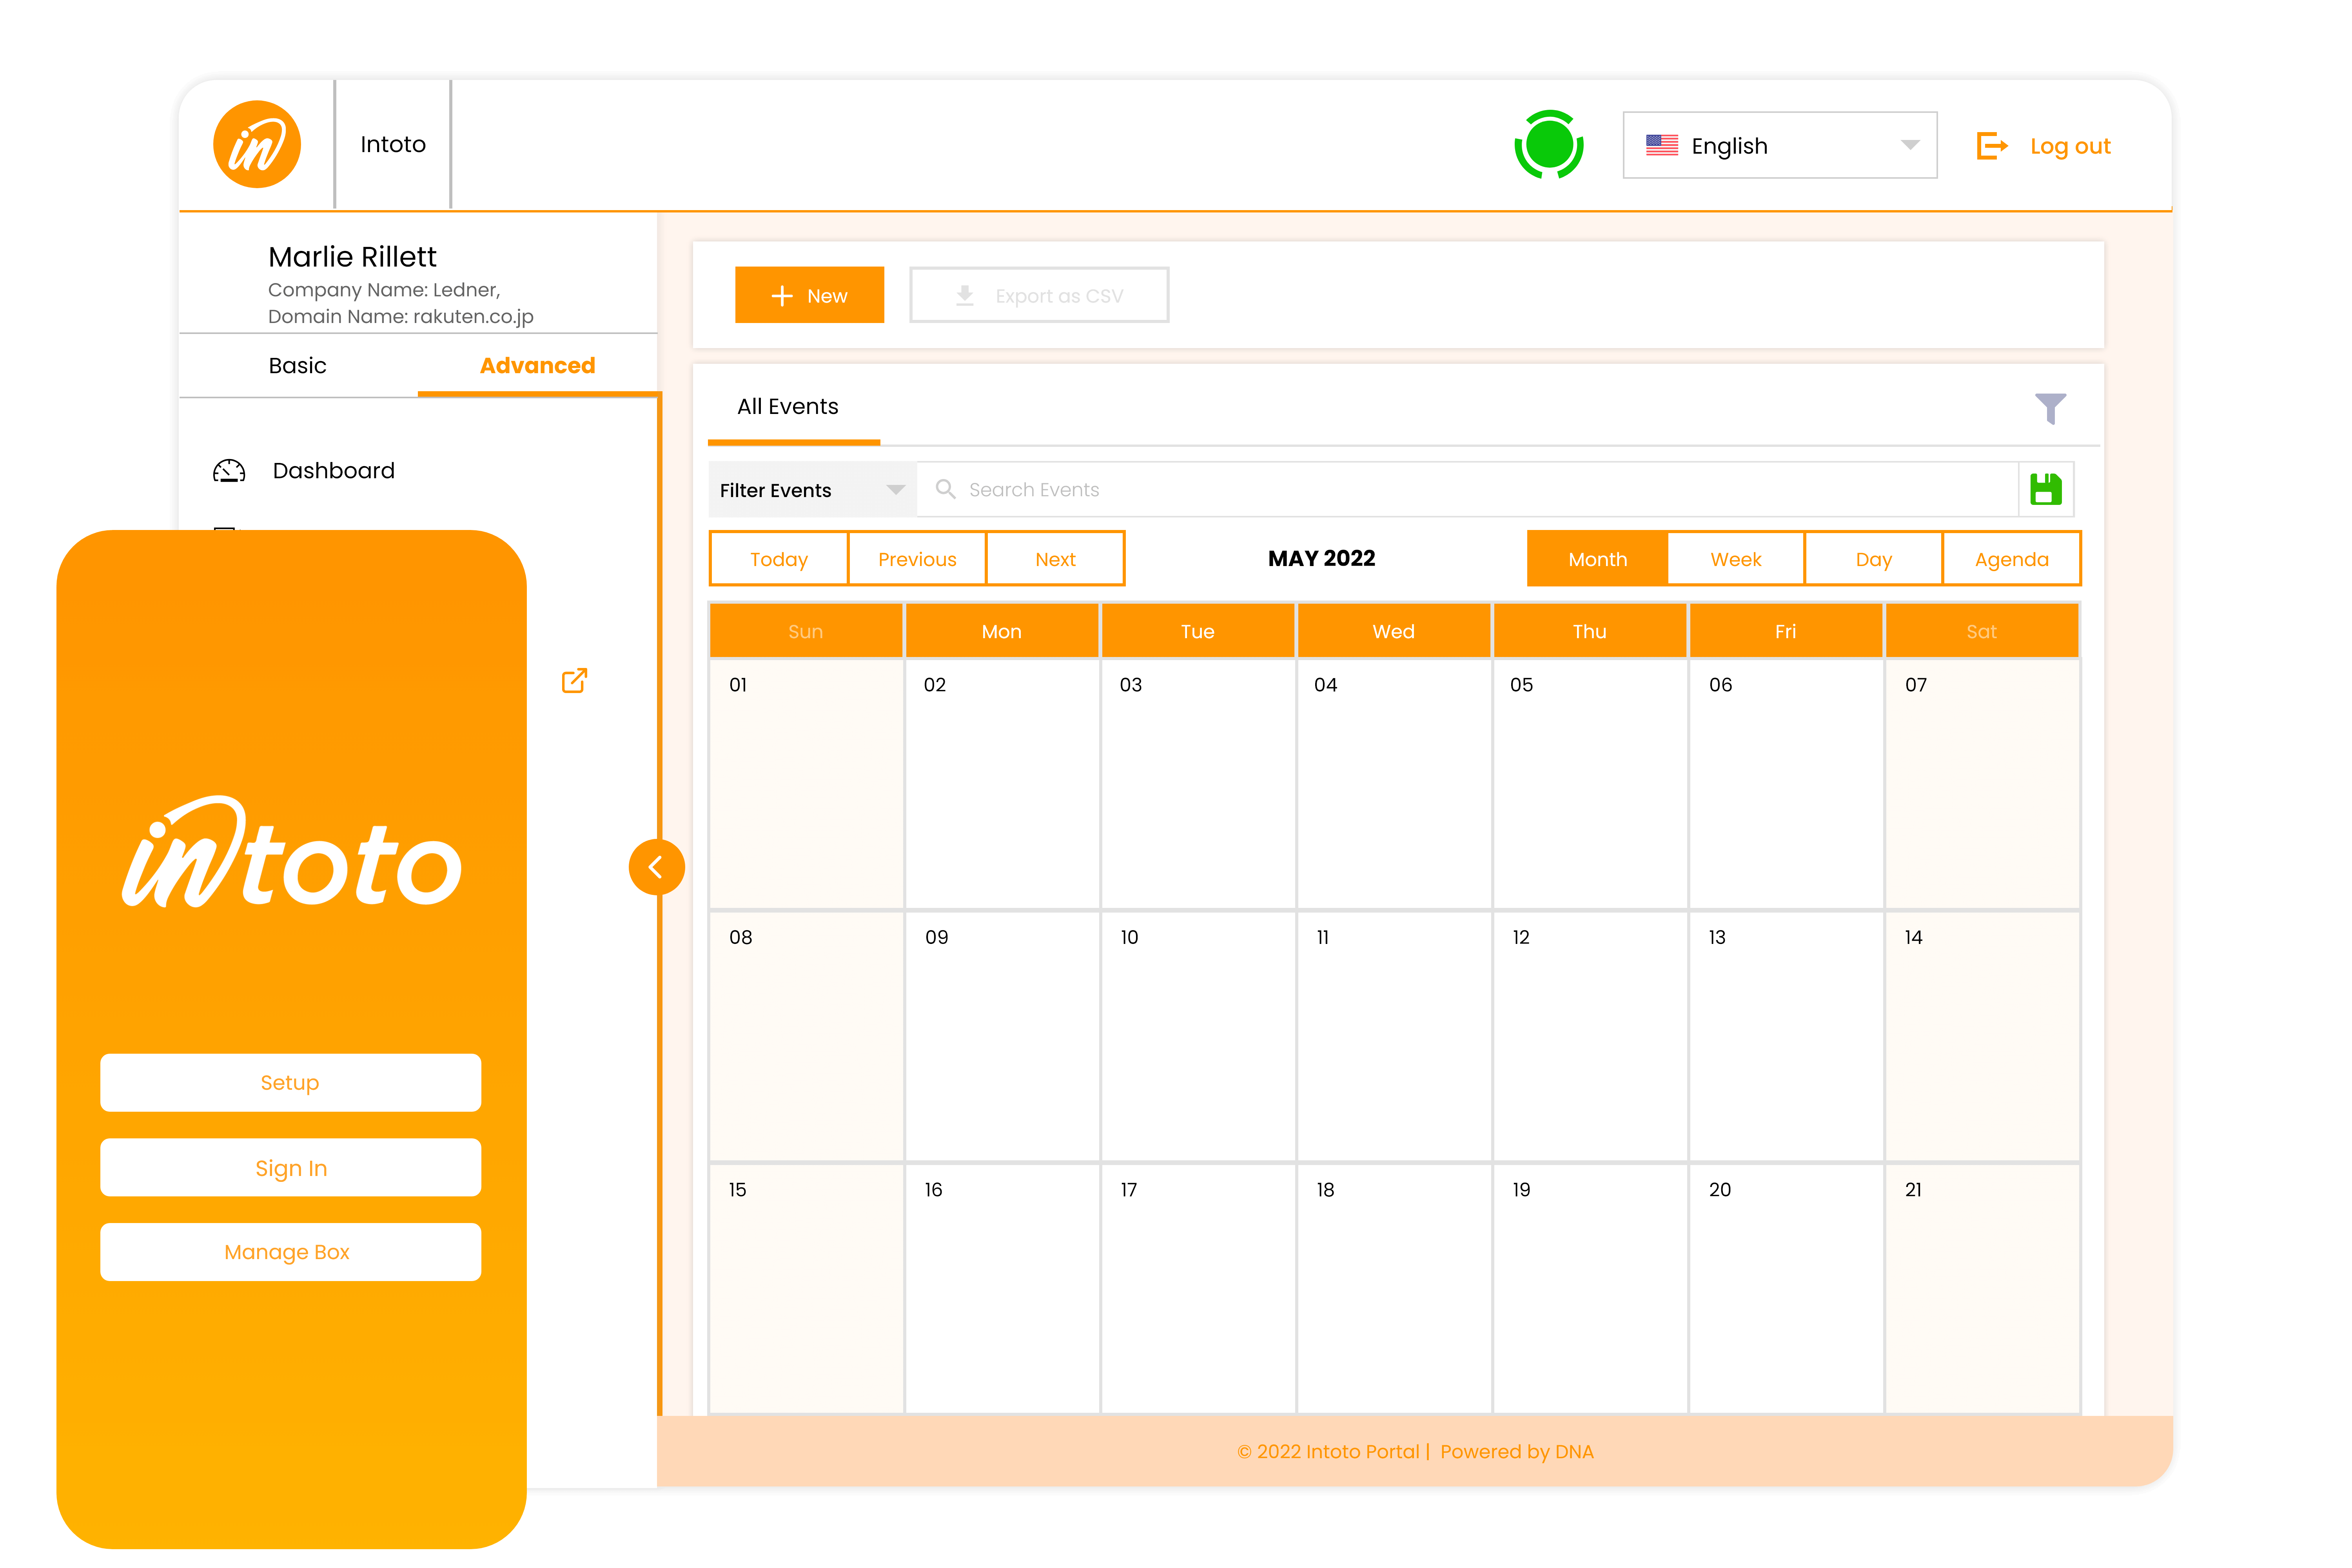 Image of the Intoto calendar dashboard and the intoto app sign up screen to show how simple this infrastructure platform is.